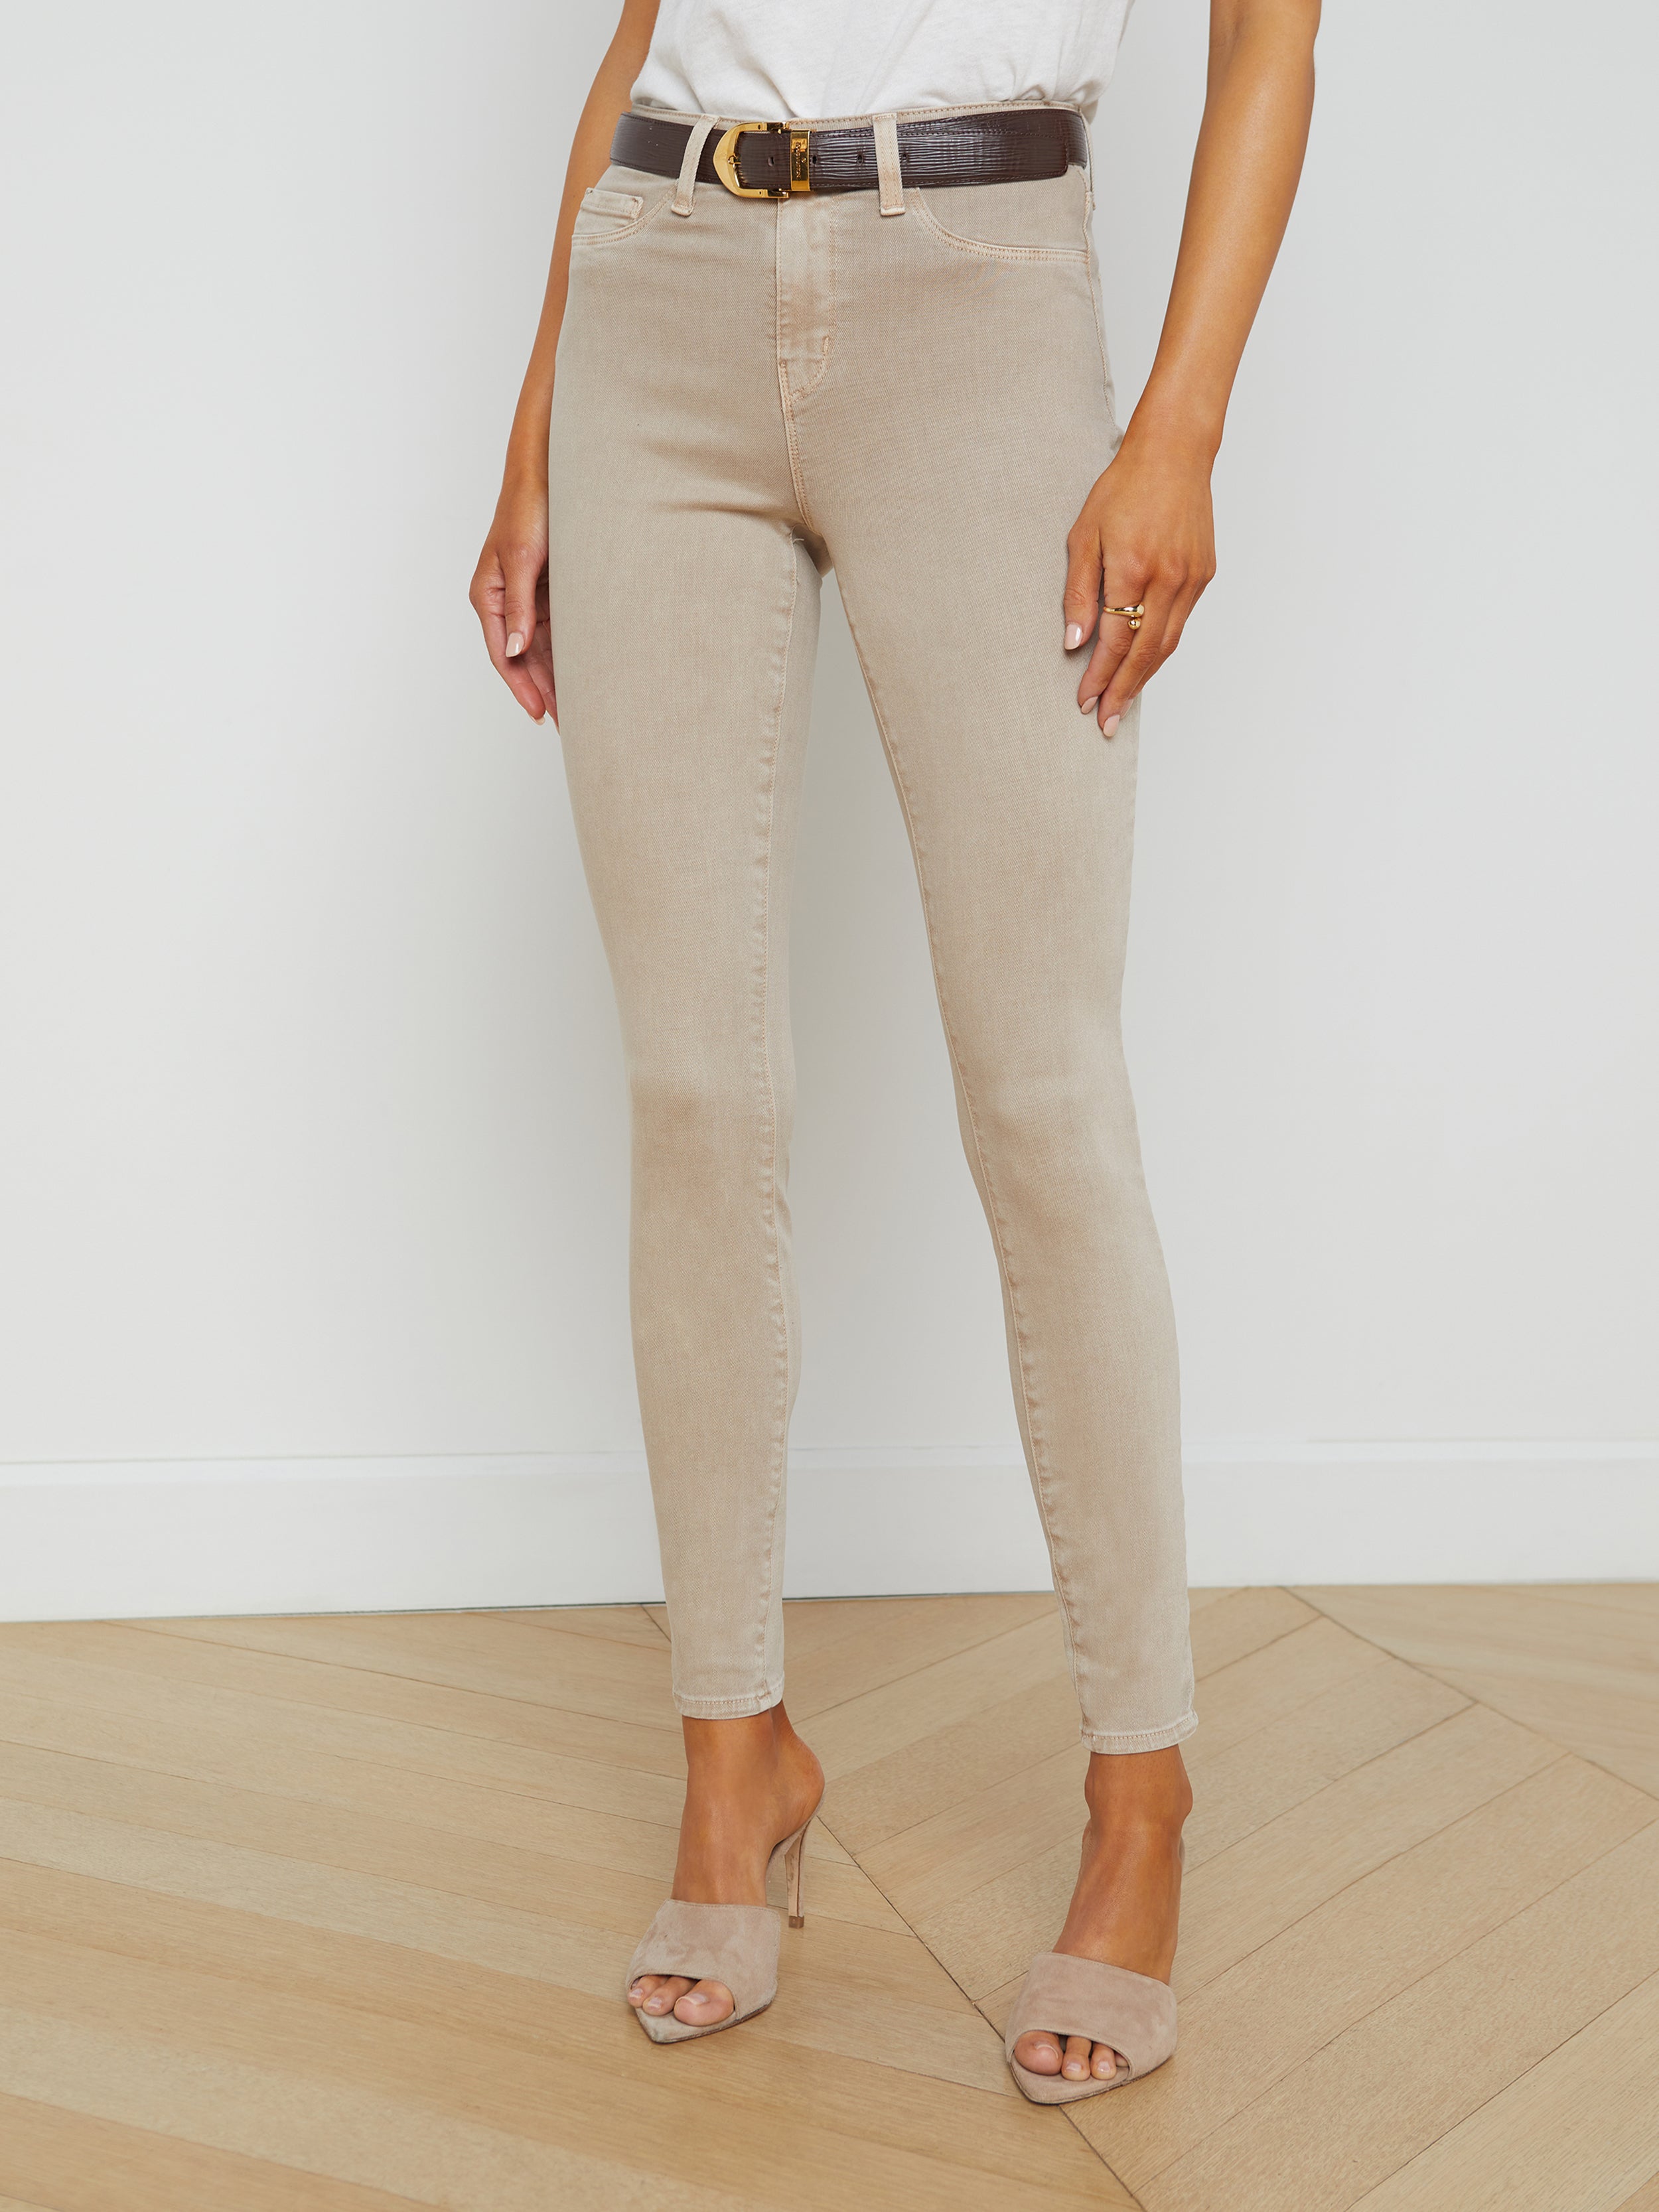 Patou | Trousers & skirts, quality & chic jeans for women - Patou.com